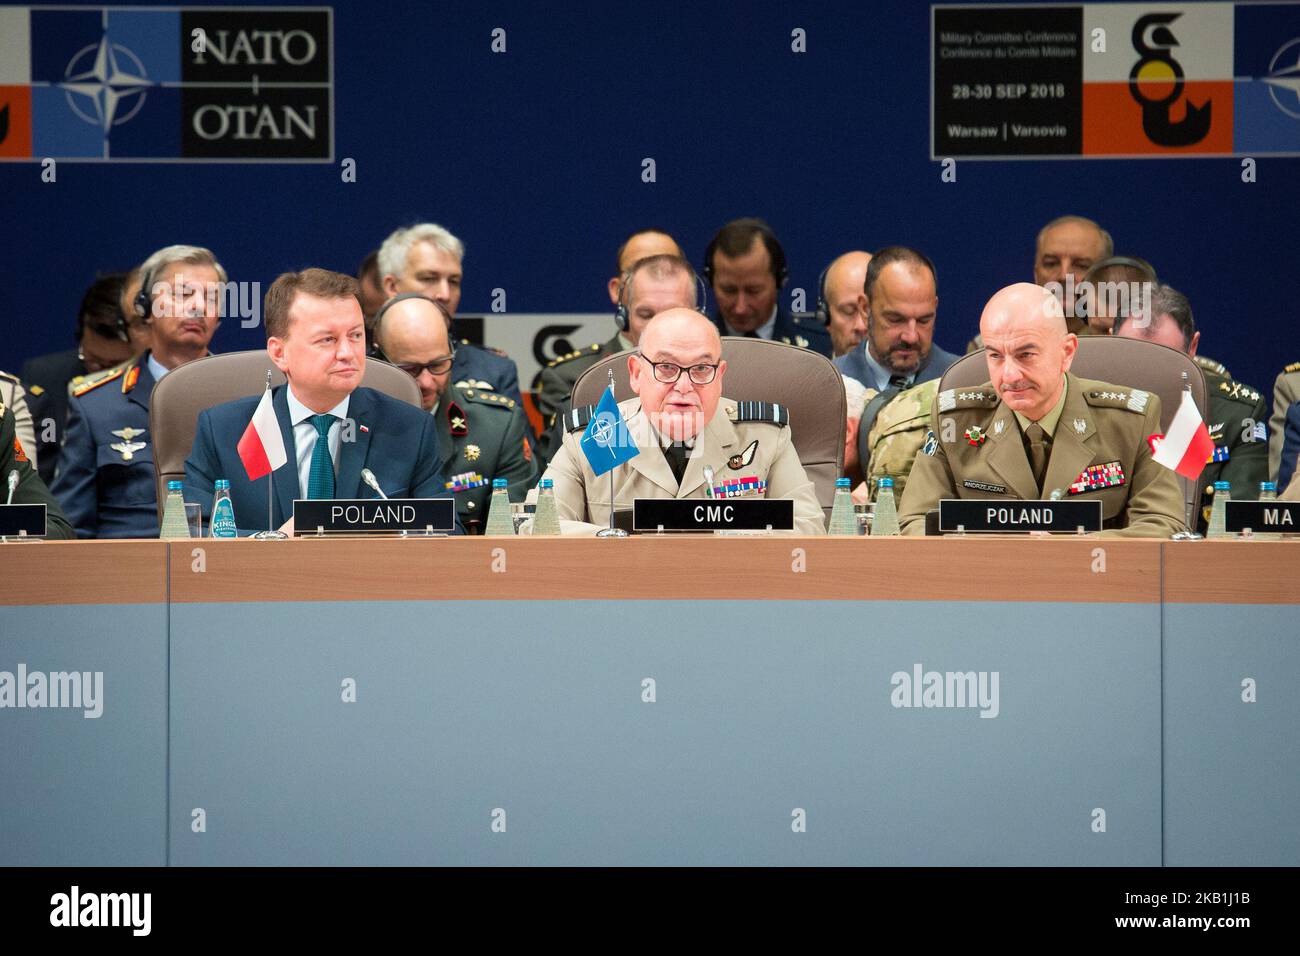 Poland's Defense Minister Mariusz Blaszczak, Chairman of the NATO Military Committee, Air Chief Marshal Sir Stuart Peach and Chief of the General Staff of the Polish Armed Forces, Lieutenant General Rajmund Andrzejczak during a opening ceremony of the NATO Military Committee Conference meeting at Double Tree by Hilton hotel in Warsaw, Poland on 29 September 2018 (Photo by Mateusz Wlodarczyk/NurPhoto) Stock Photo